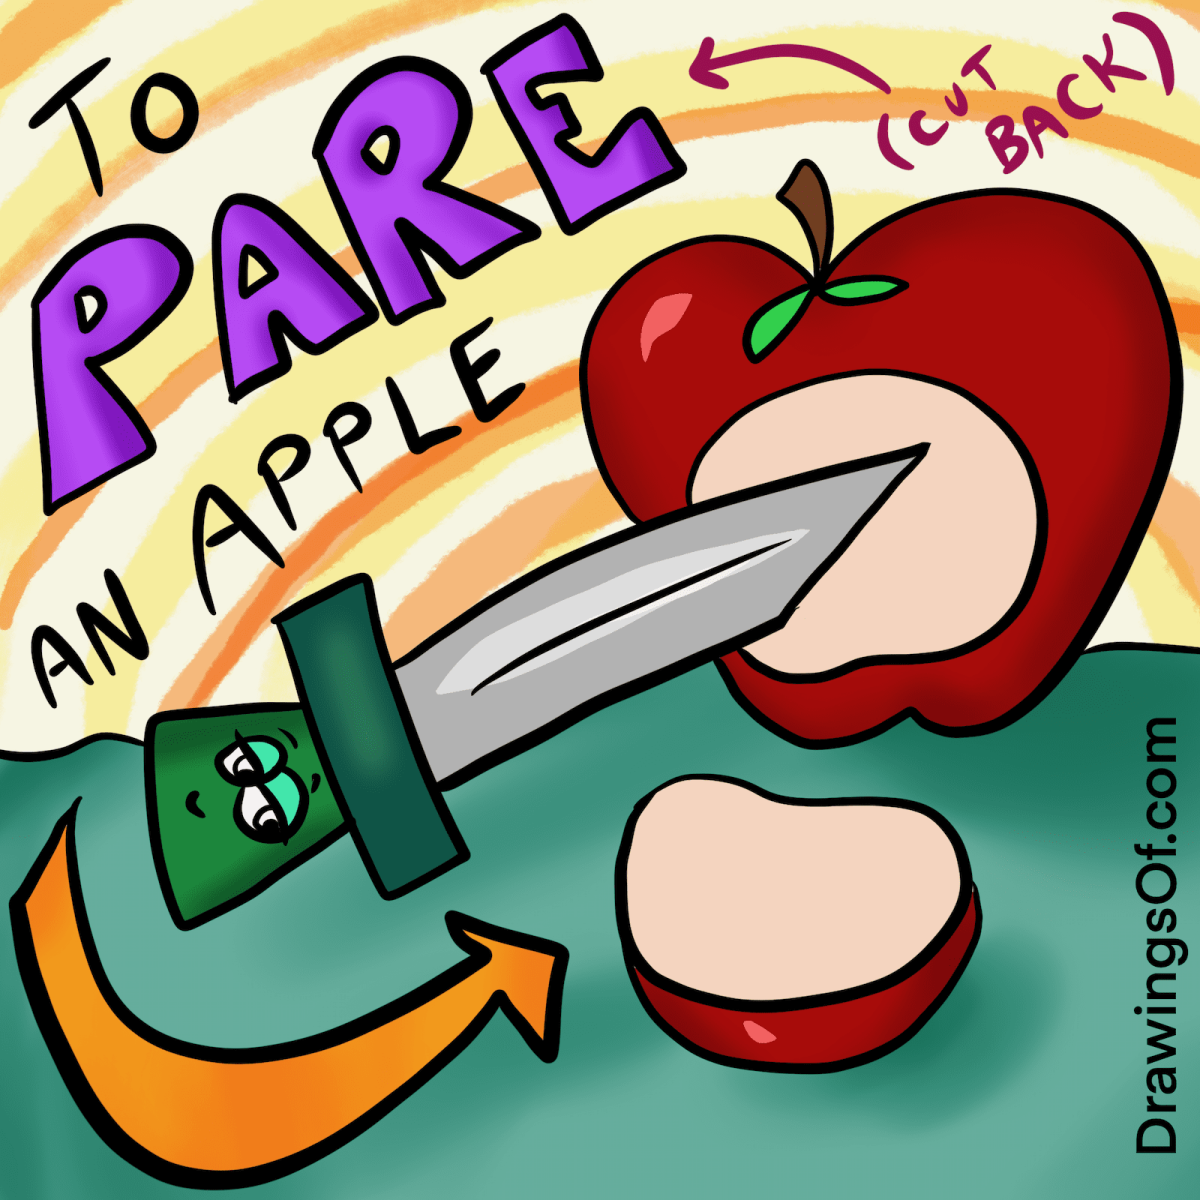 How to use the word "pare."